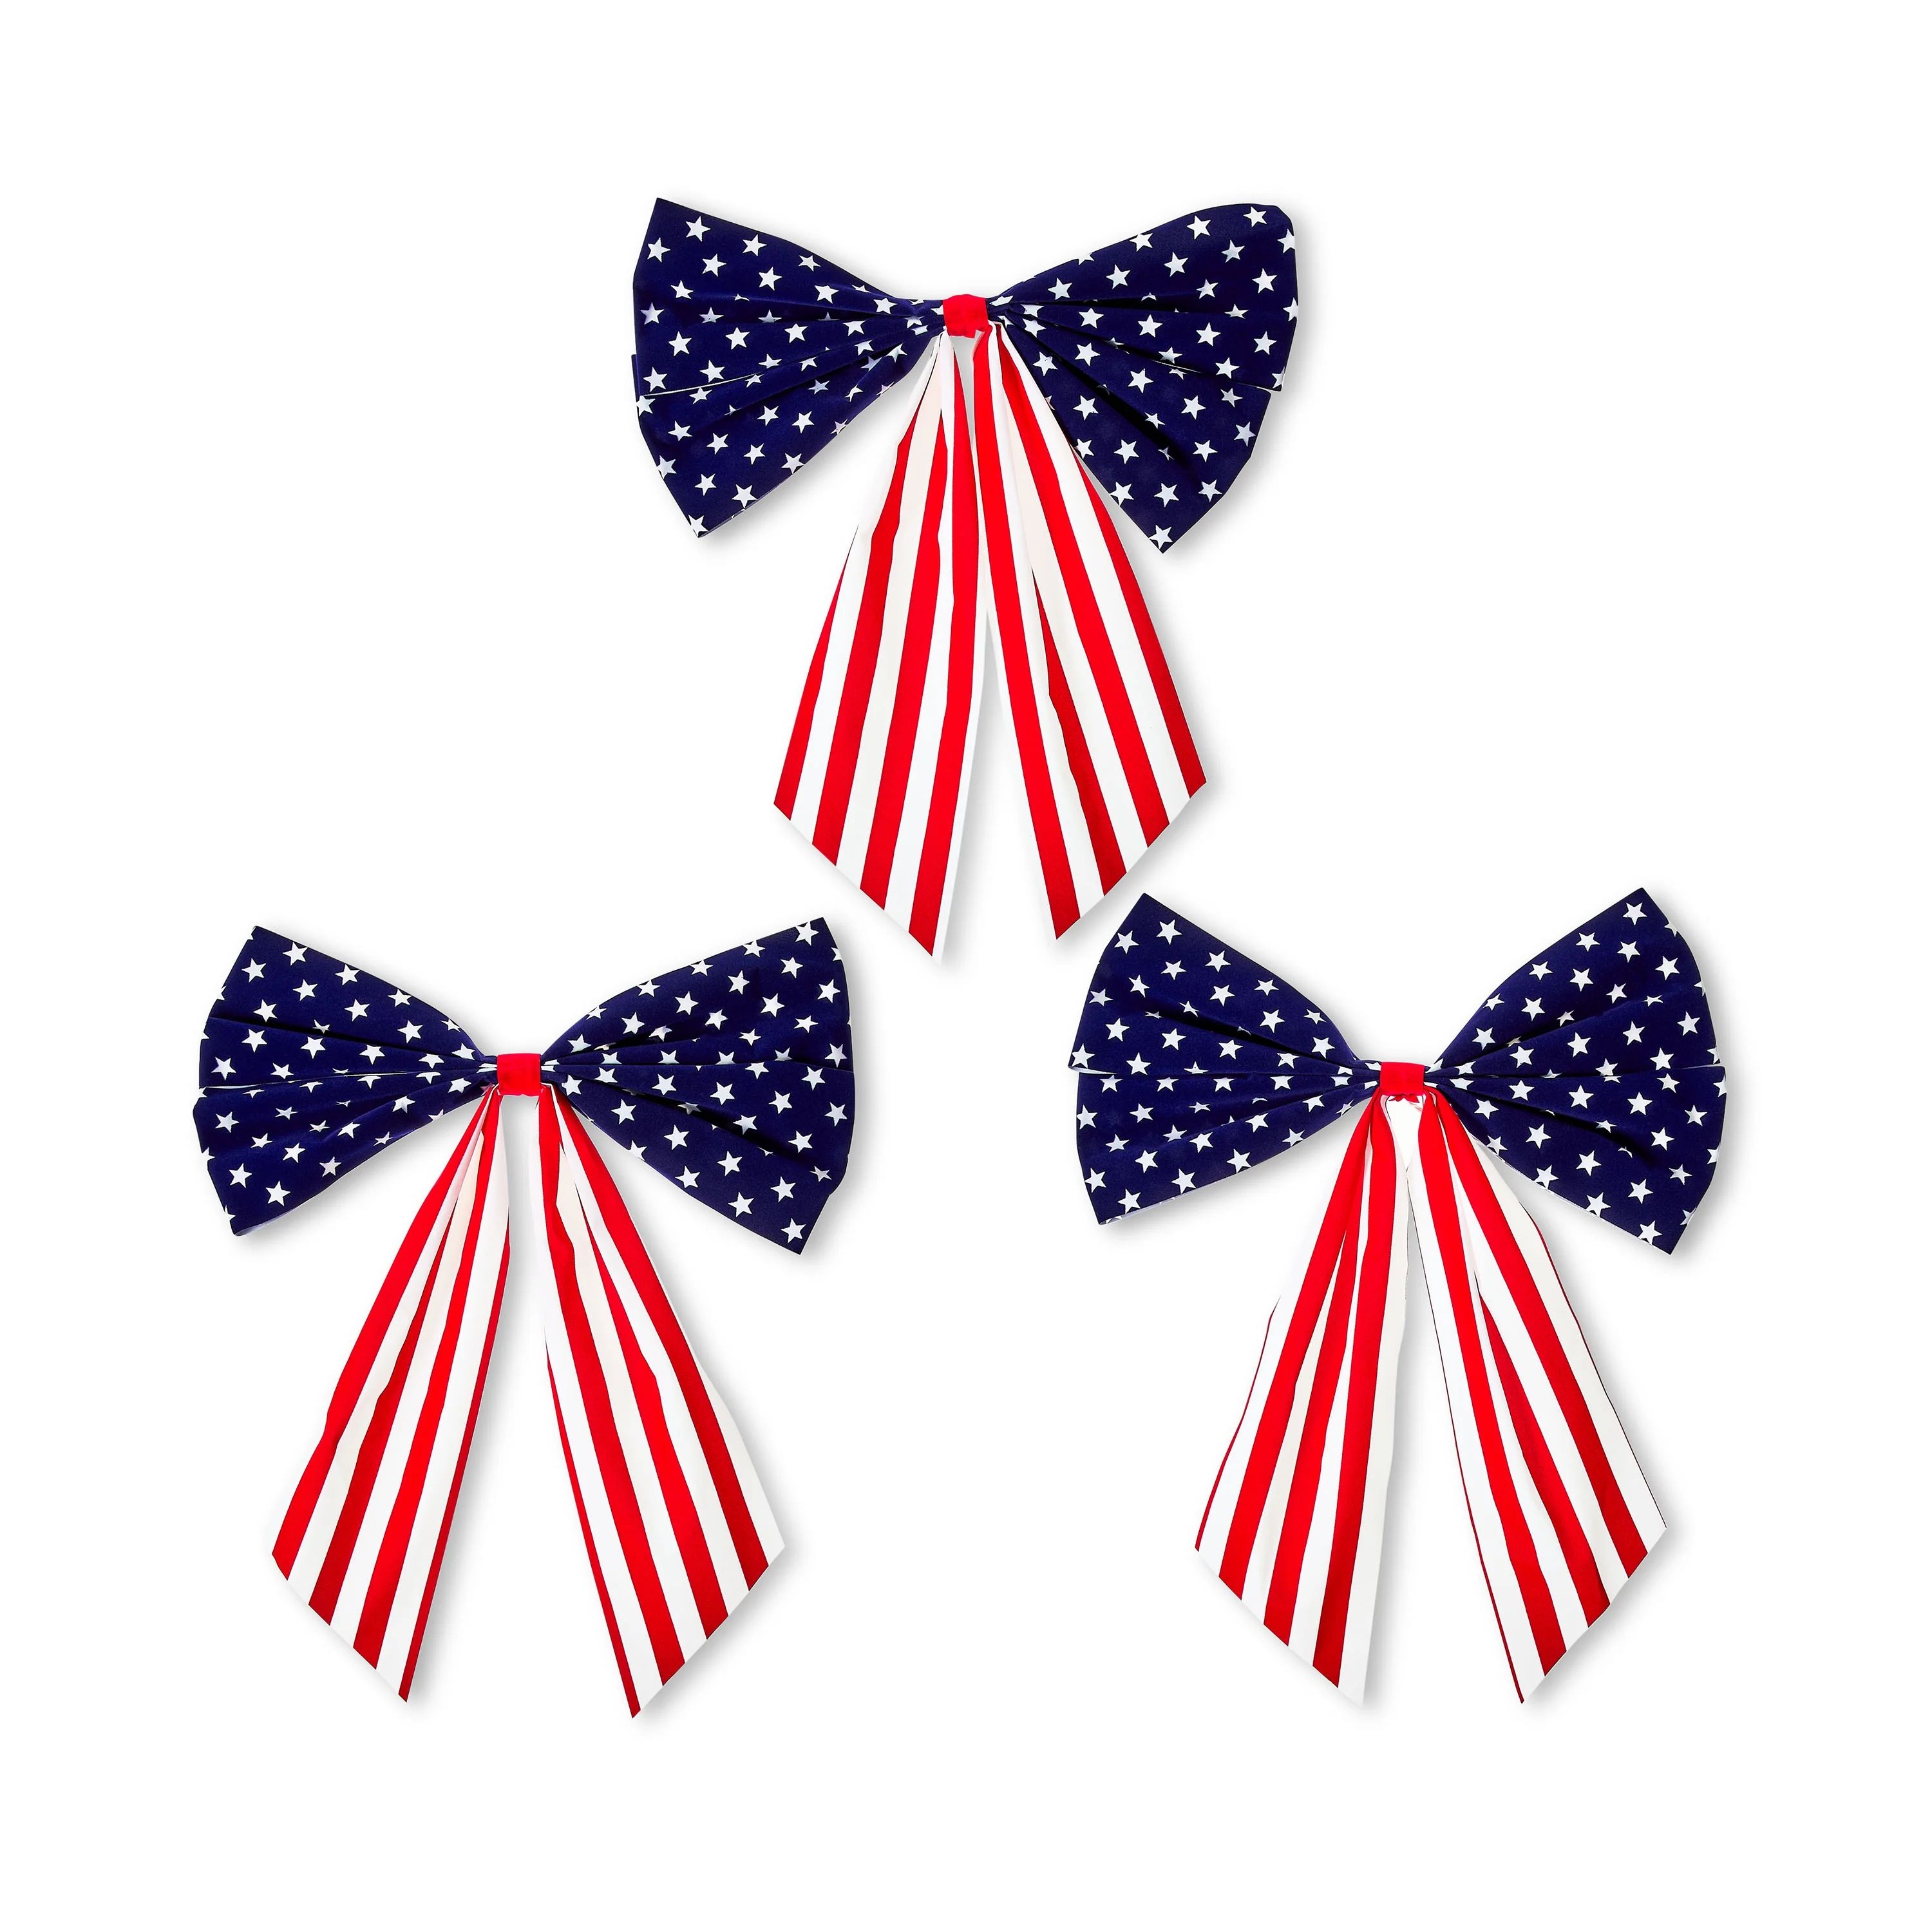 Patriotic Red, White & Blue Flocked Bow Decorations, 3 Count, by Way To Celebrate | Walmart (US)